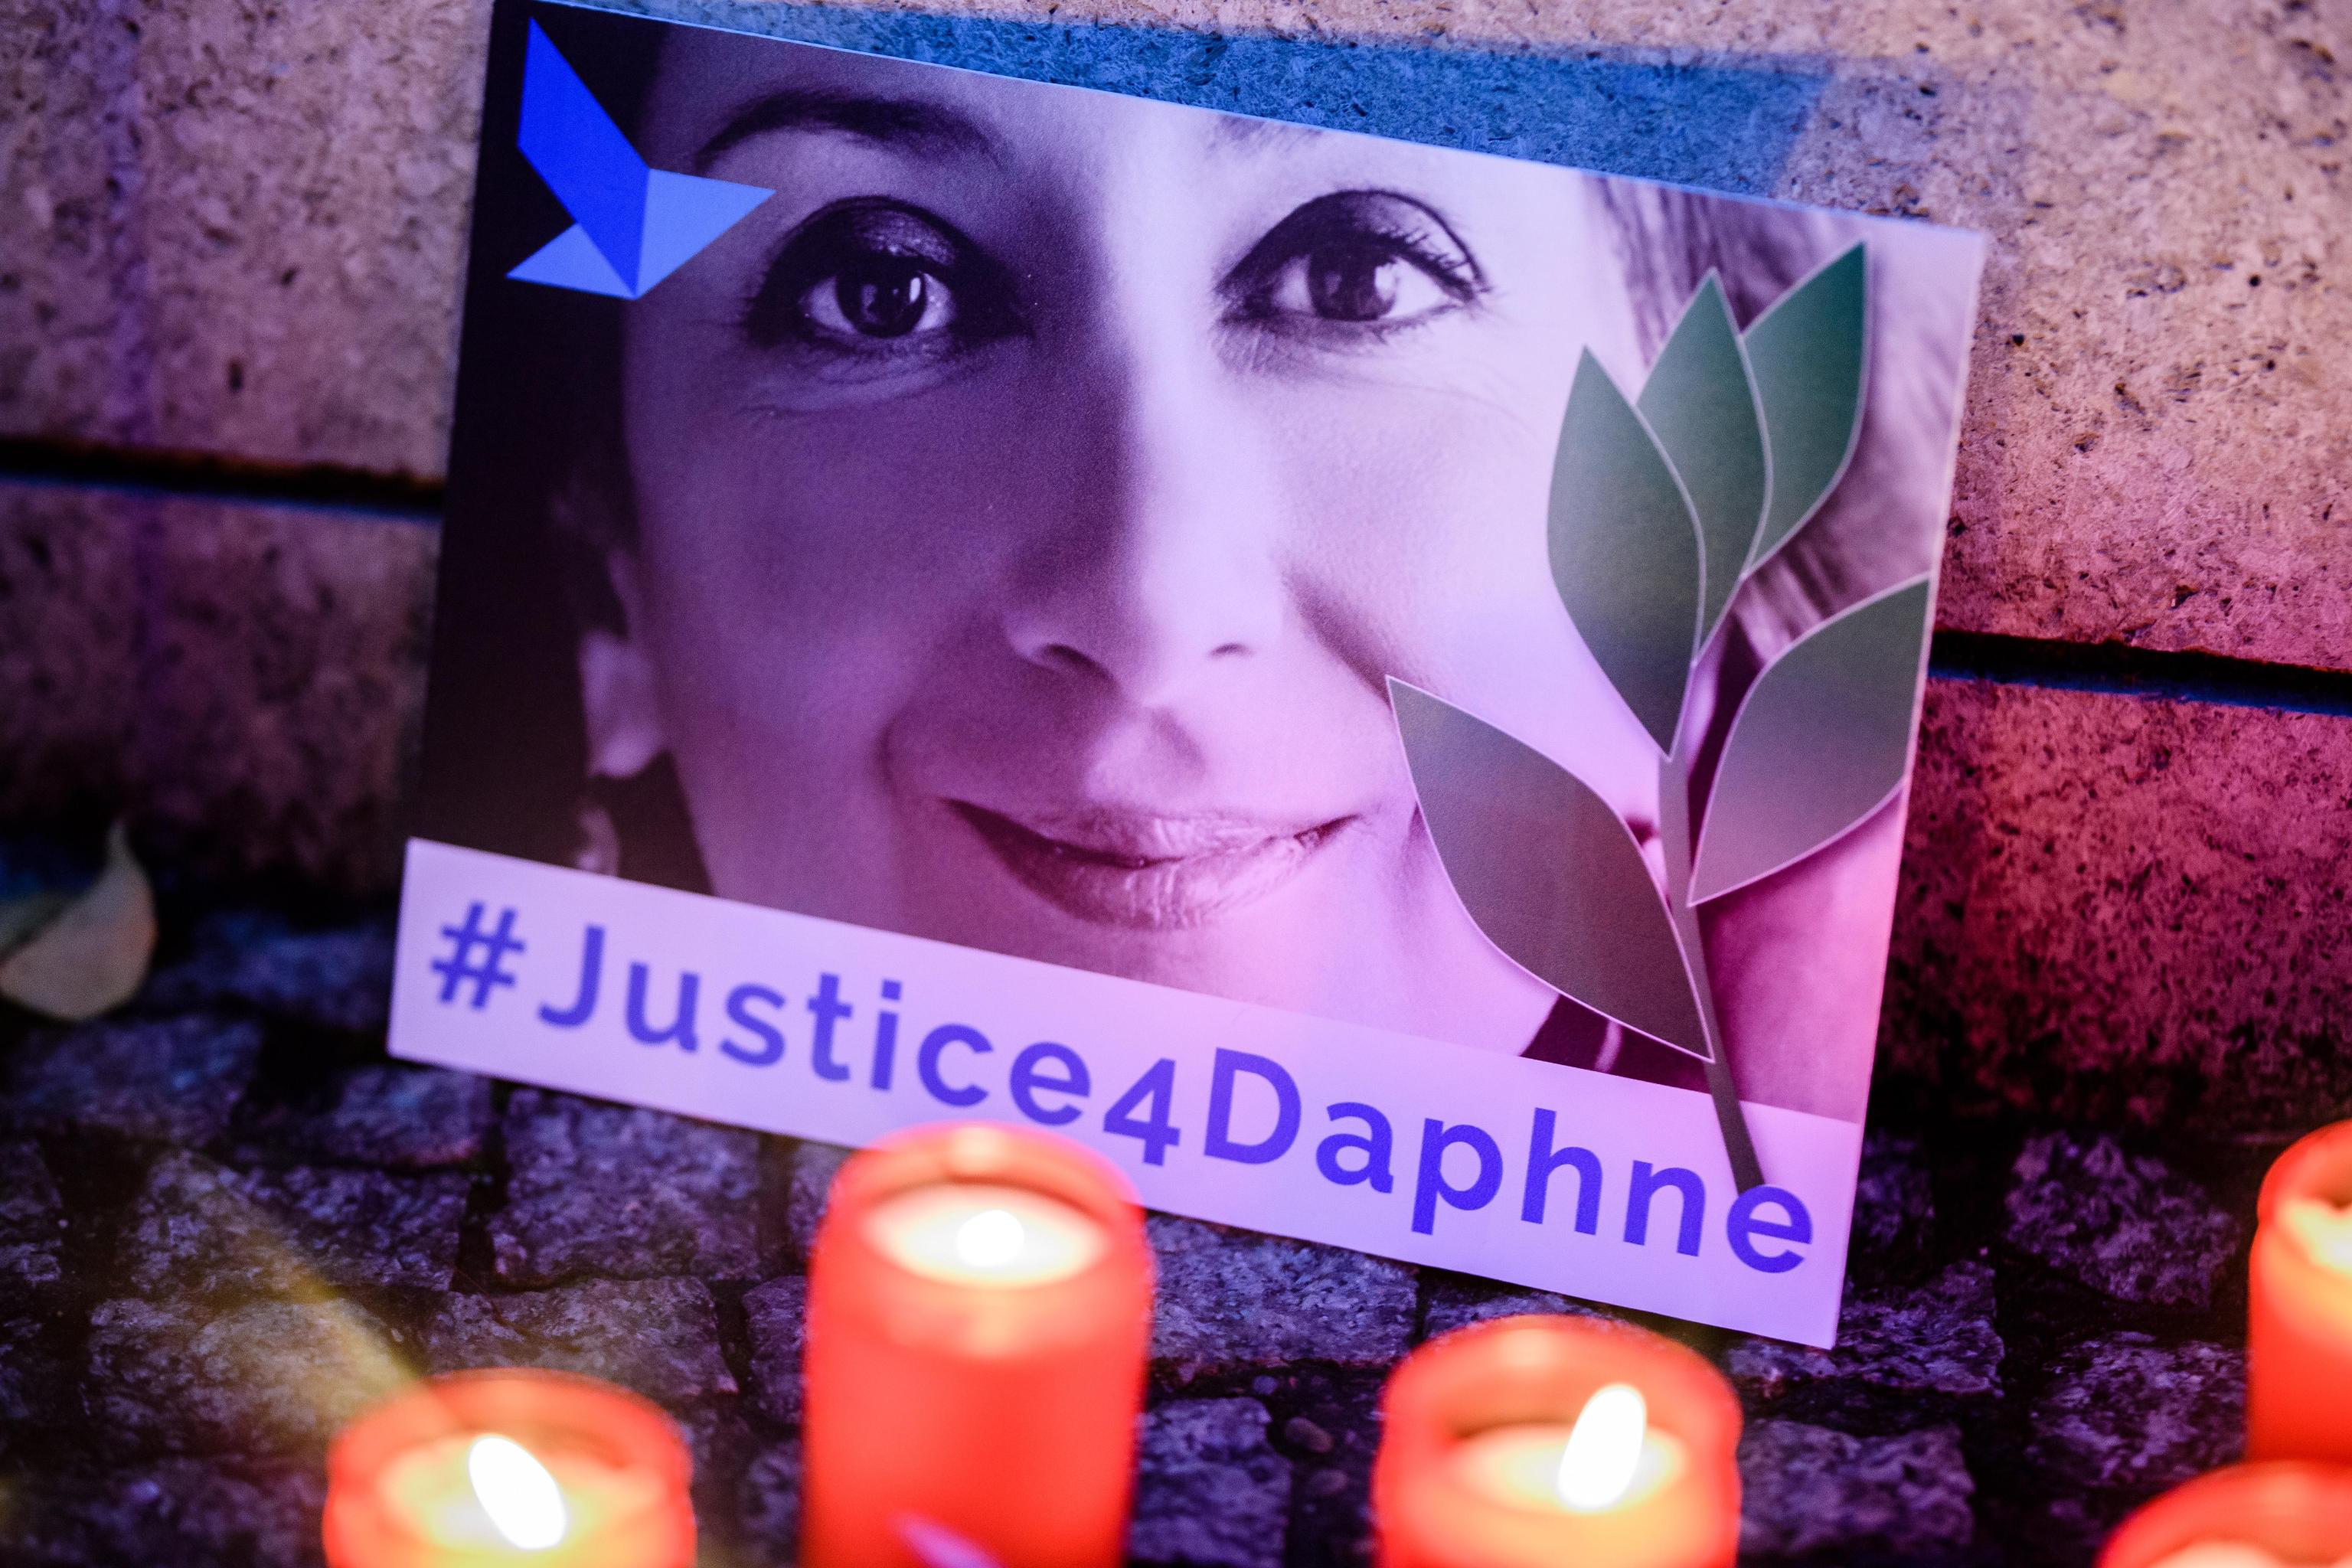 epa07925848 'Justice four Daphne' is written on a cardboard showing a photo of Daphne Caruana Galizia, during a picket in front of the Maltese embassy for murdered journalist Daphne Caruana Galizia in Berlin, Germany, 16 October 2019. Reporters Without Borders organized a picket for murdered journalist Daphne Caruana Galizia, who was killed on 16 October 2017 in Malta, while investigating the Panama Papers case.  EPA/CLEMENS BILAN